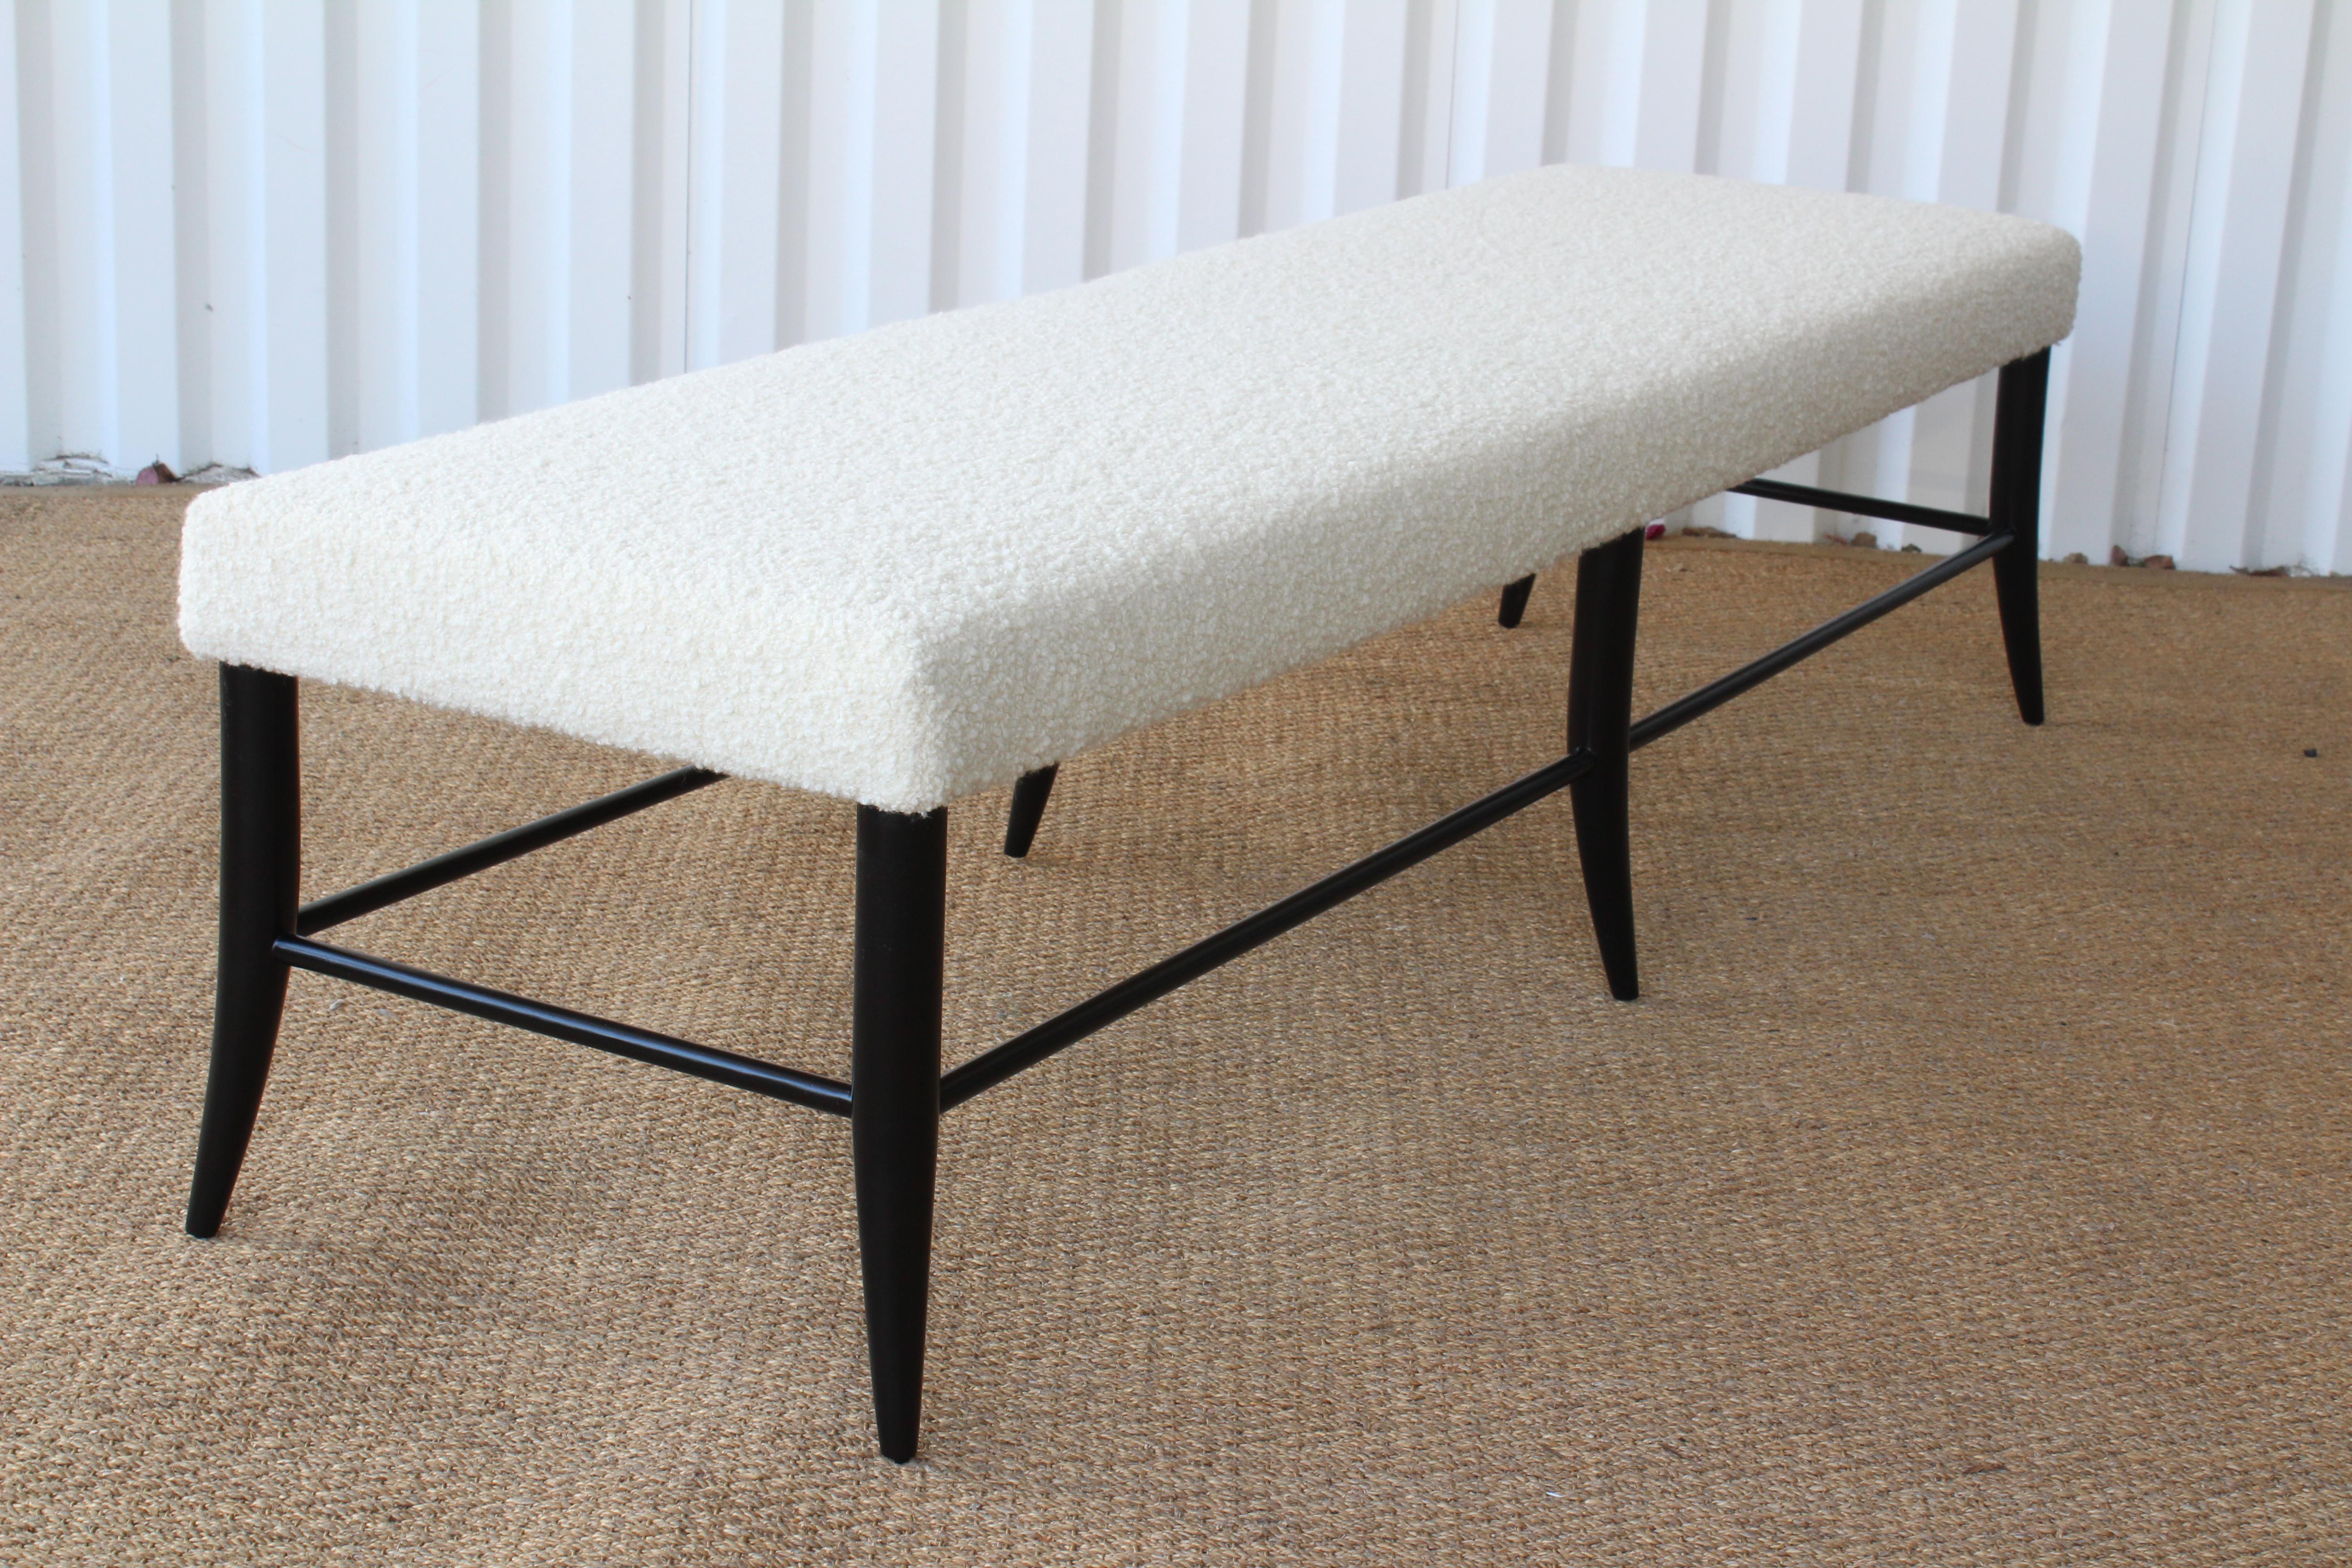 Custom croft bench by Hollywood at Home, upholstered in an alpaca wool bouclé. Handmade in Los Angeles. Satin black wooden base.